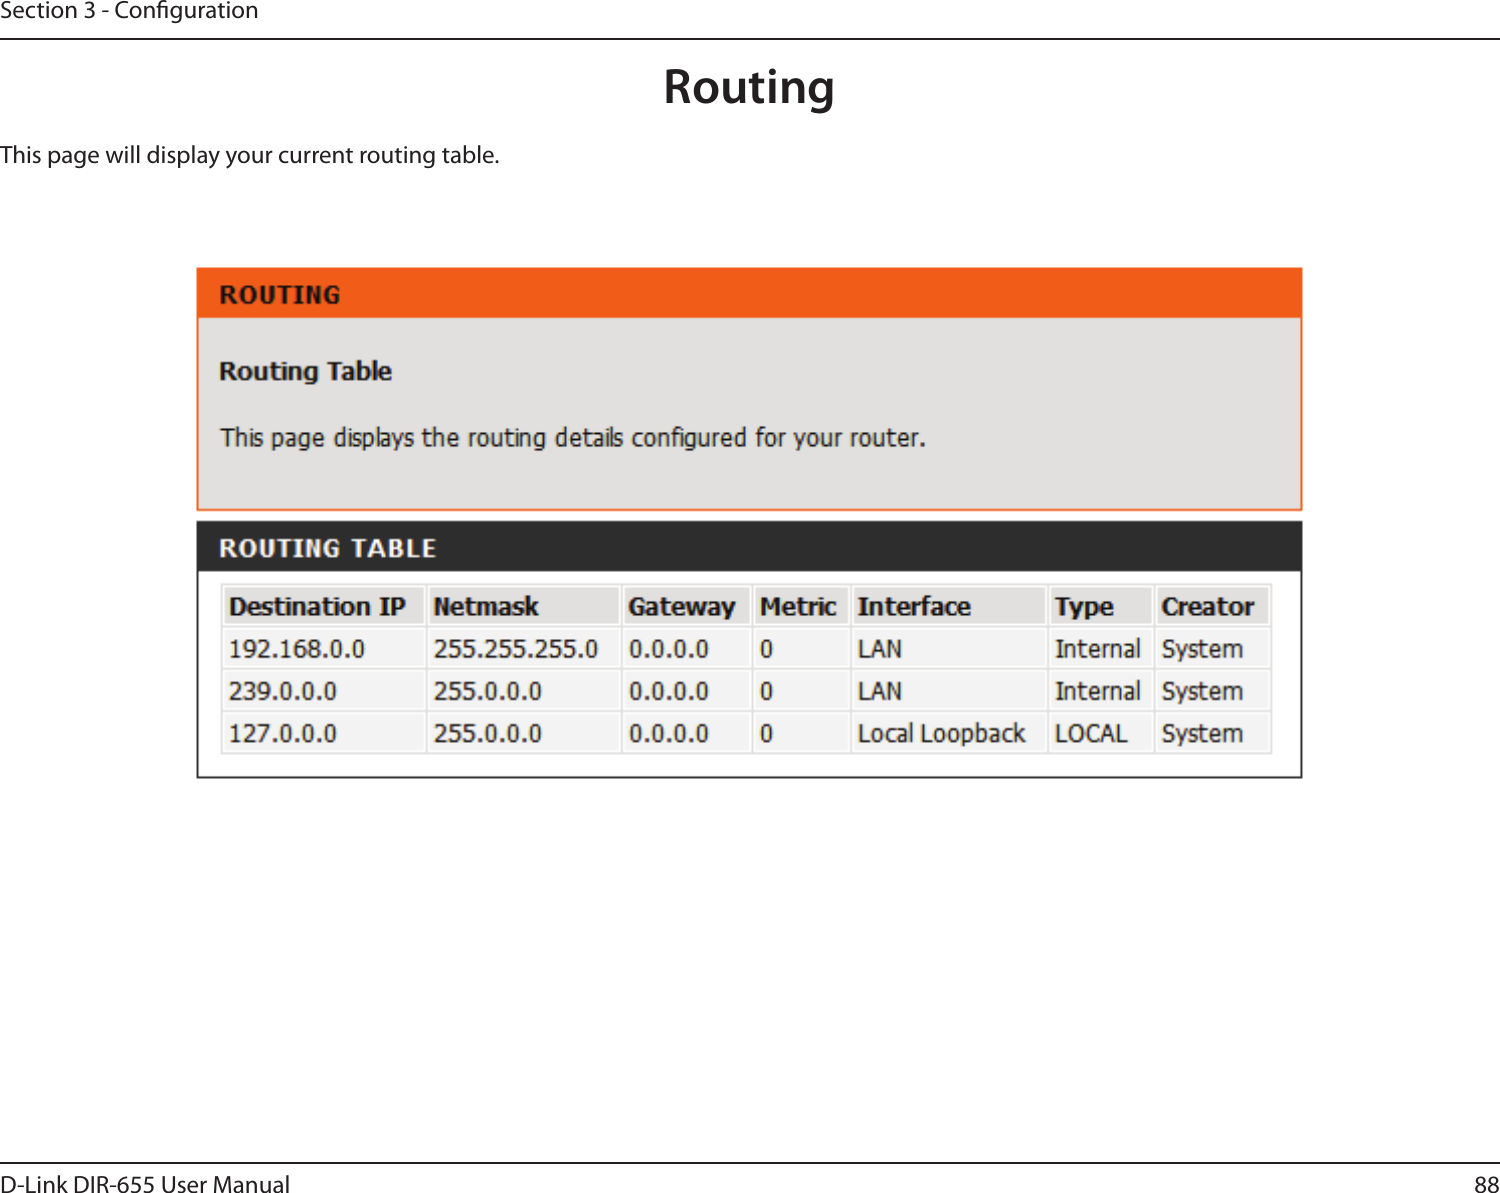 88D-Link DIR-655 User ManualSection 3 - CongurationRoutingThis page will display your current routing table.